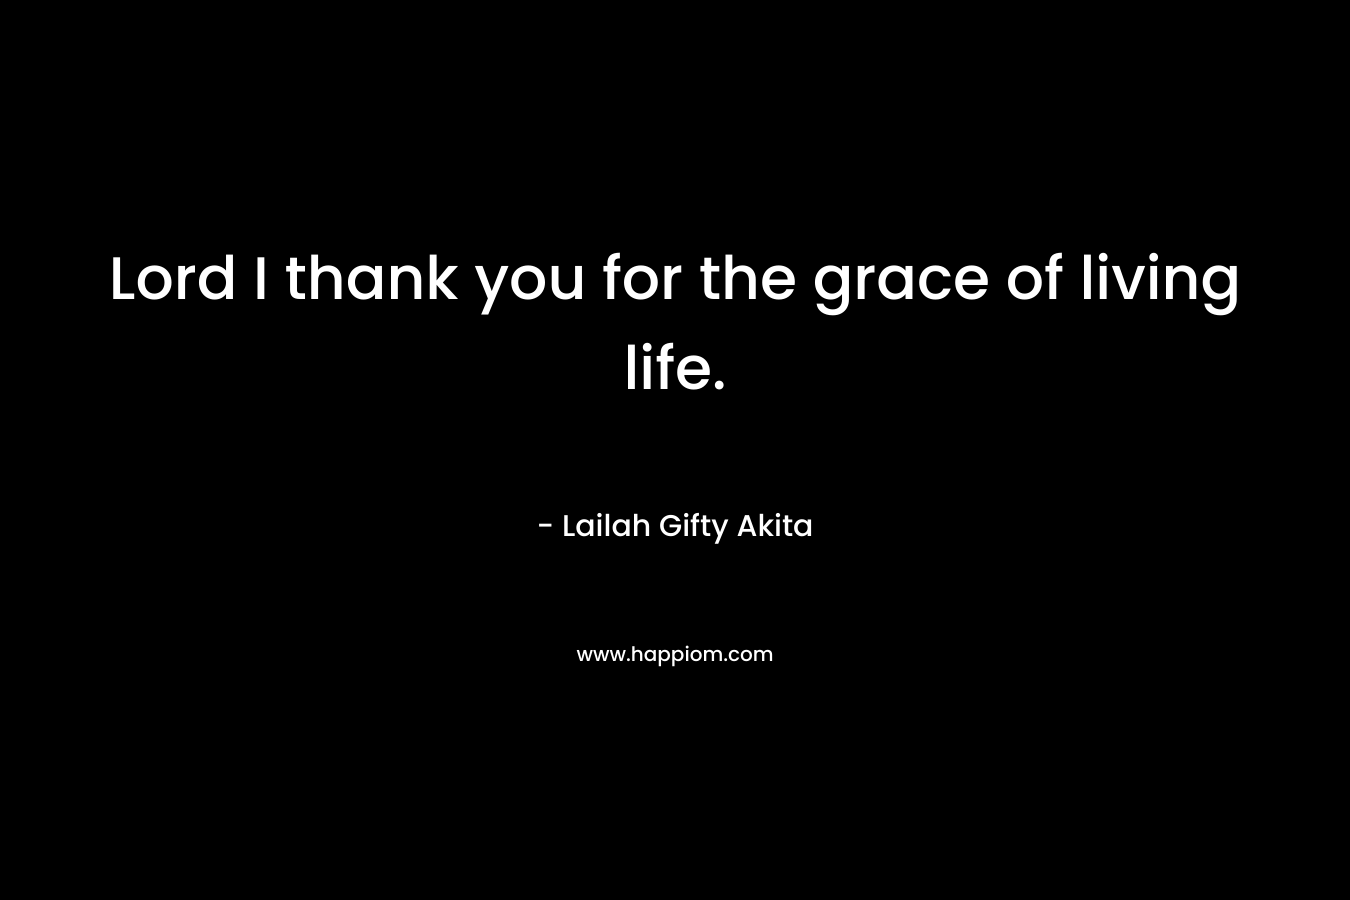 Lord I thank you for the grace of living life.